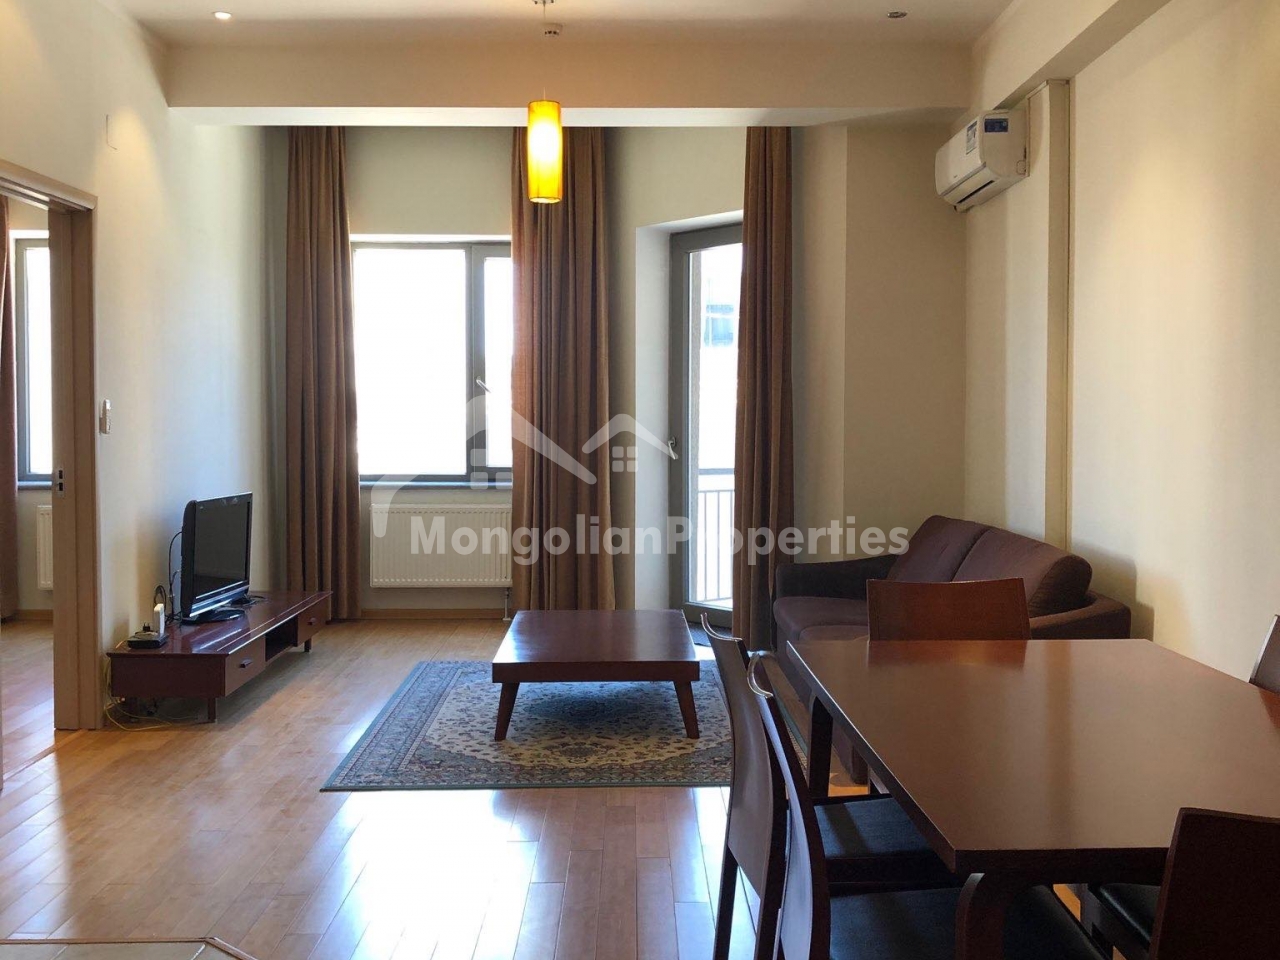 FOR RENT: FULLY FURNISHED, COZY 2 BEDROOM APARTMENT AT REGENCY RESIDENCE